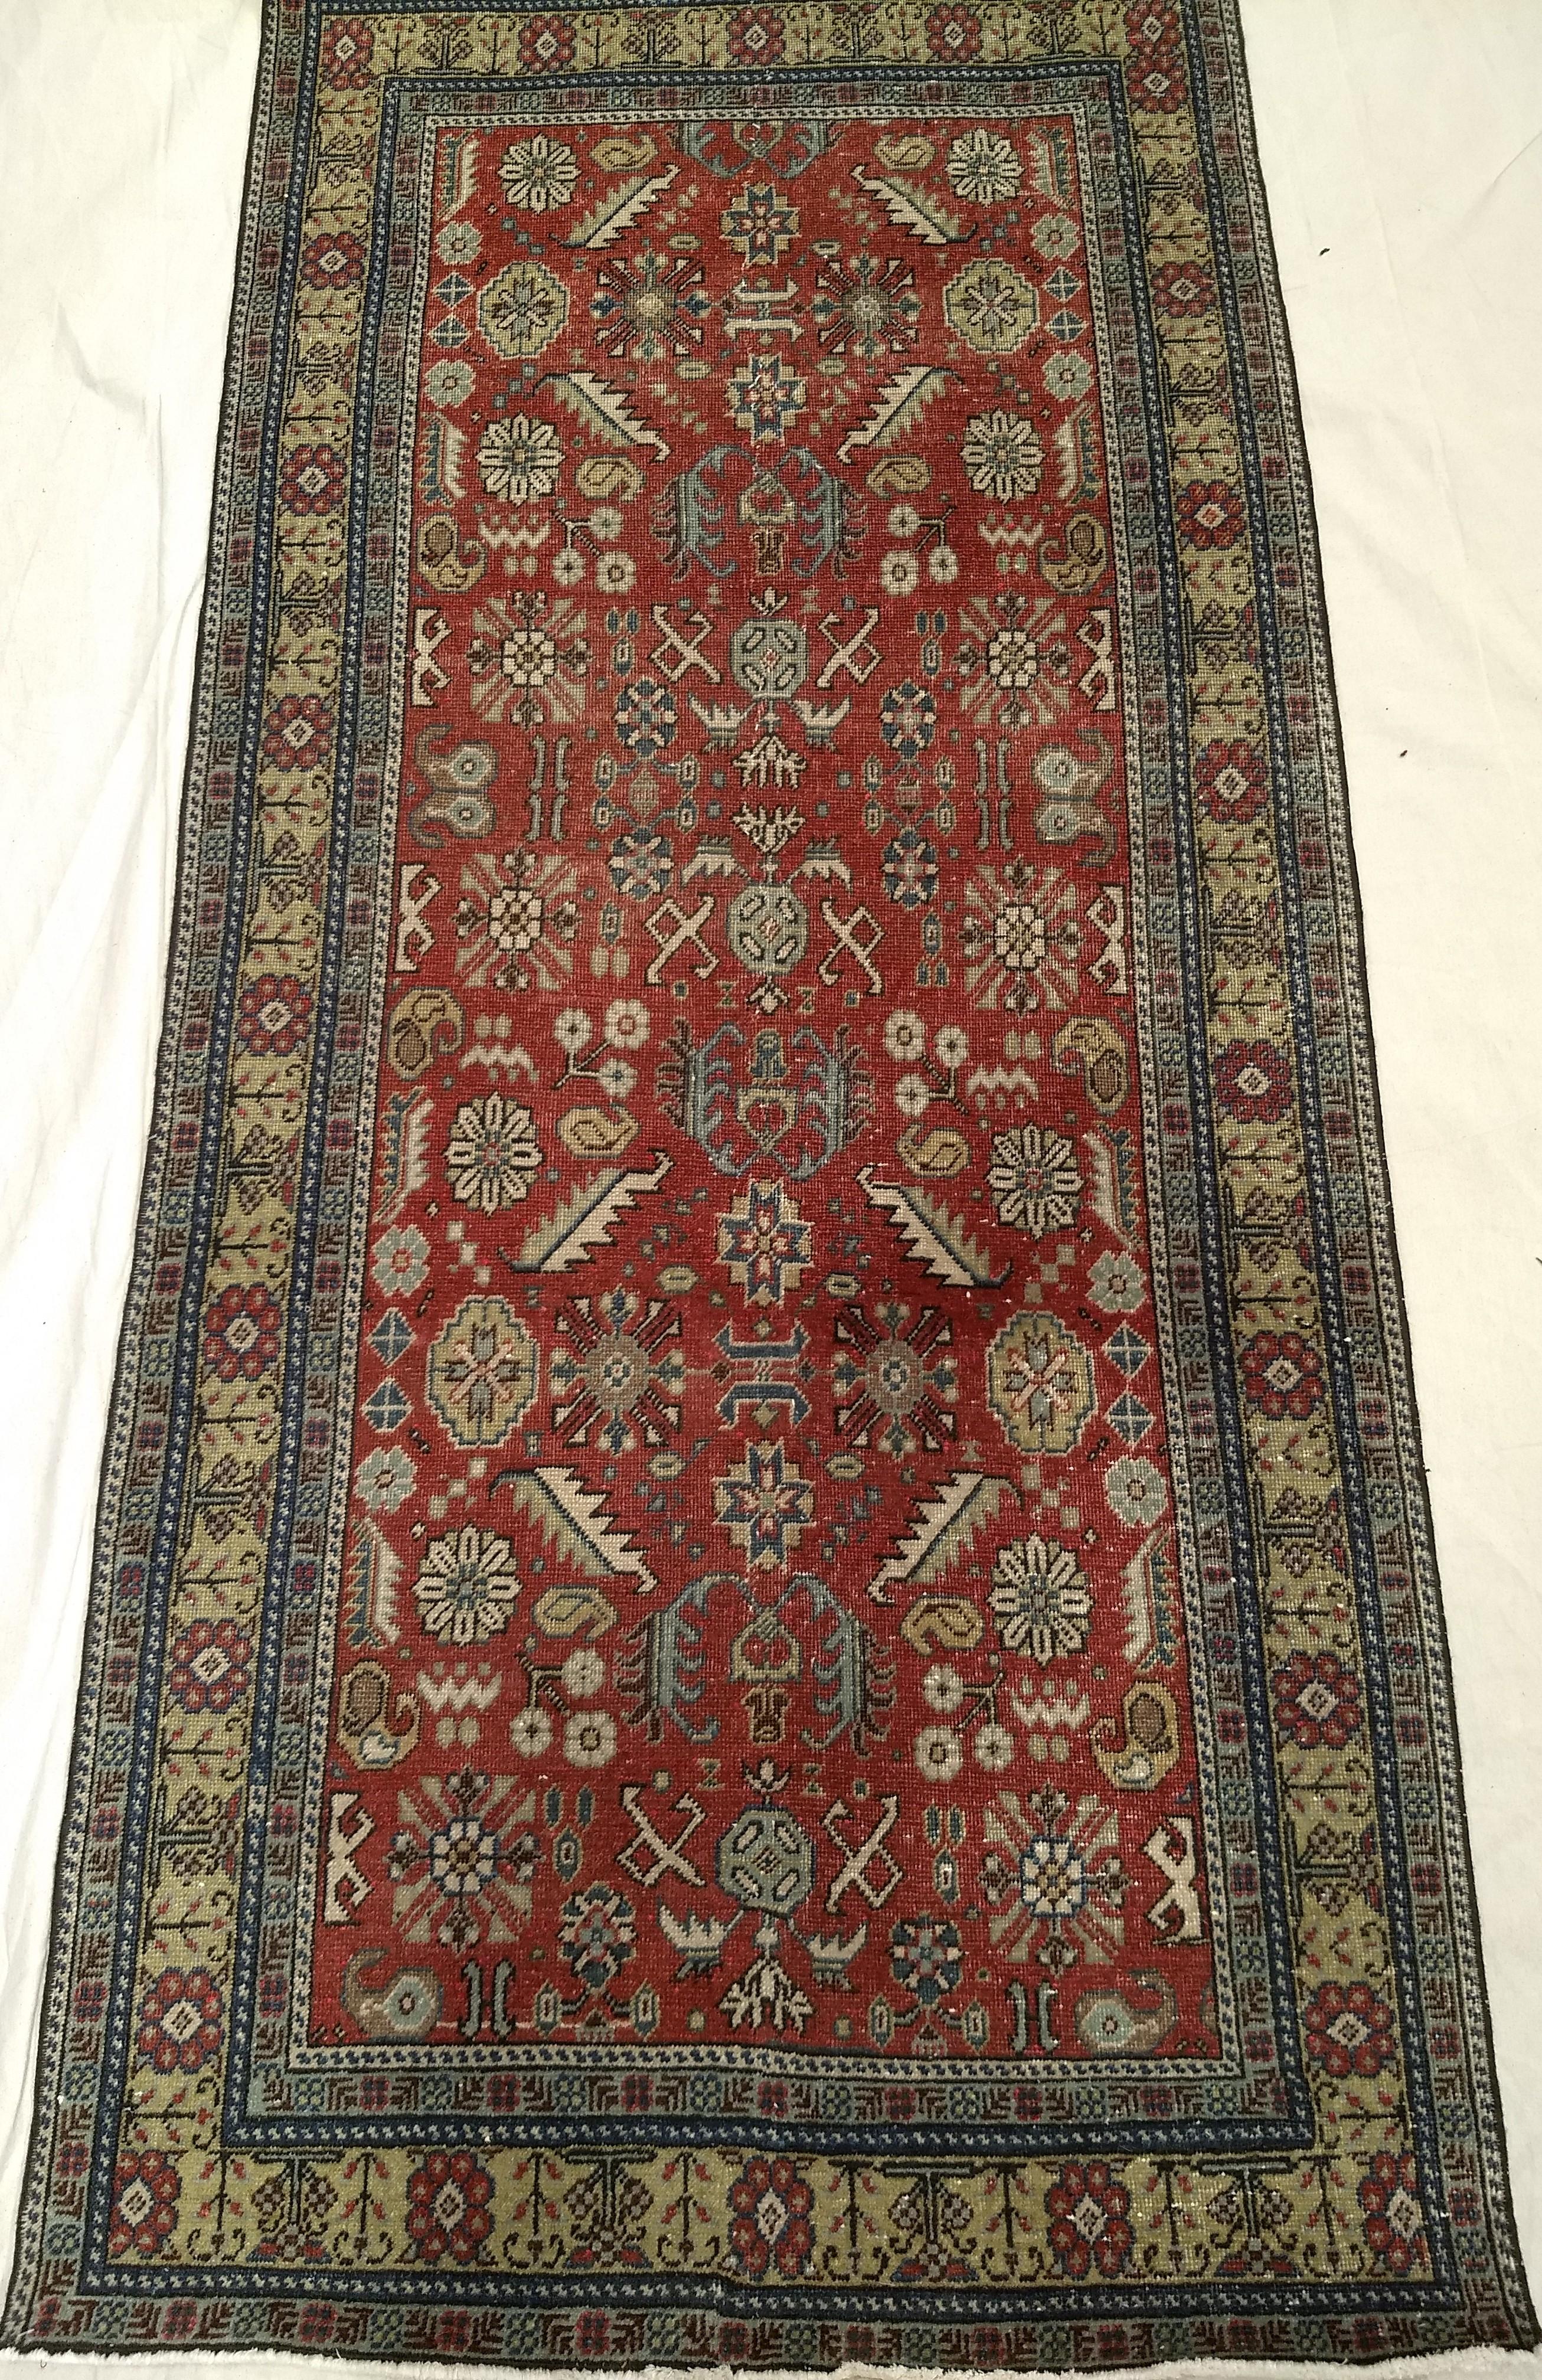 Vintage Khotan Area Rug in Allover Geometric Pattern on Brick Red, Yellow, Ivory For Sale 5